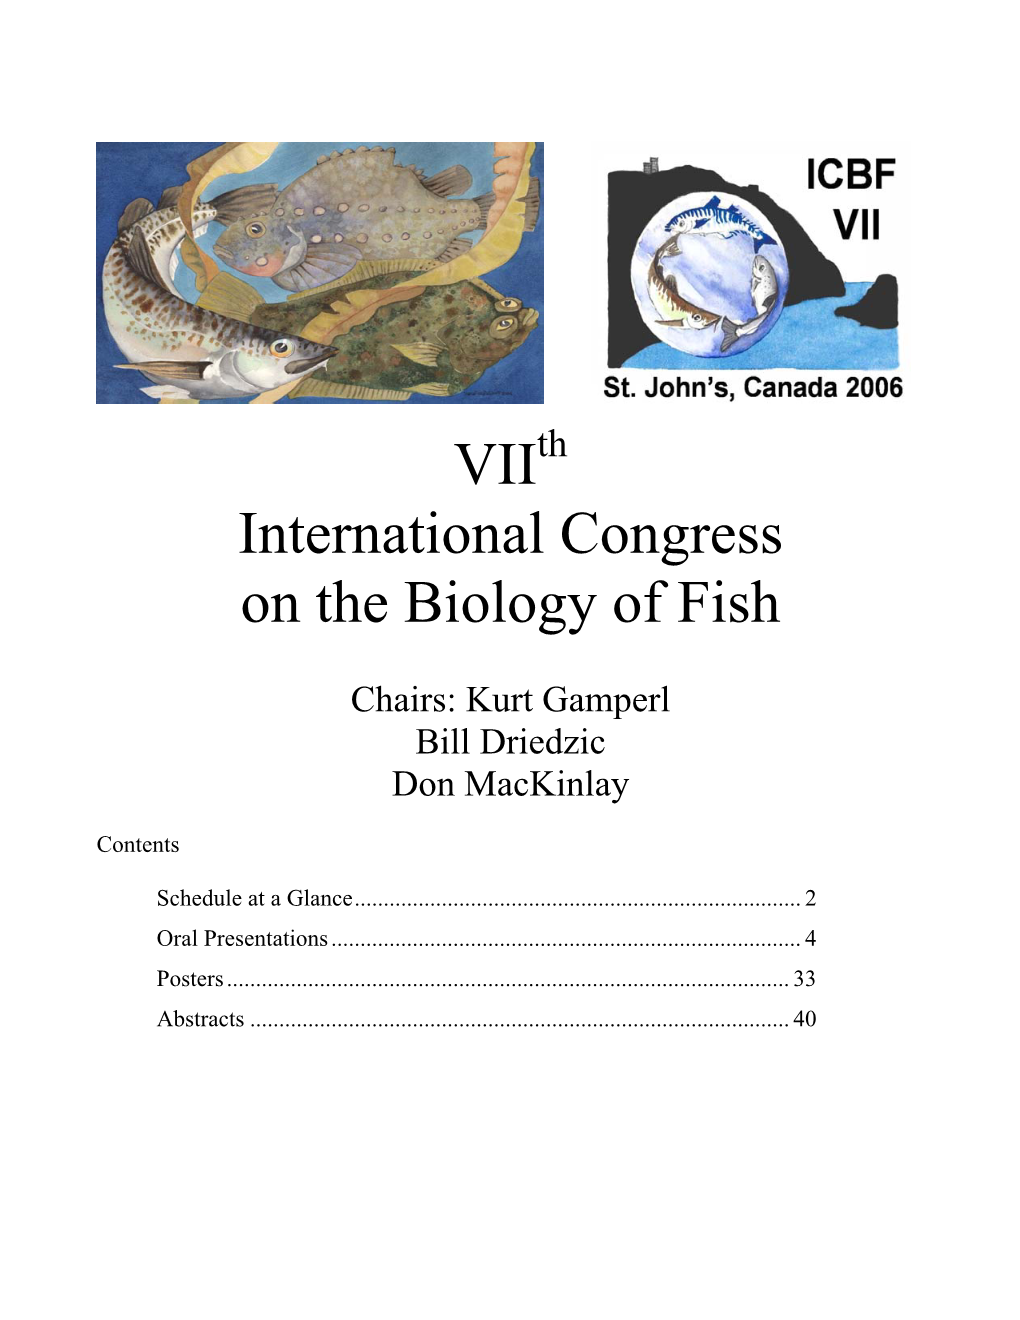 VII International Congress on the Biology of Fish Schedule-At-A-Glance - Morning (8:00AM to 1:10PM)